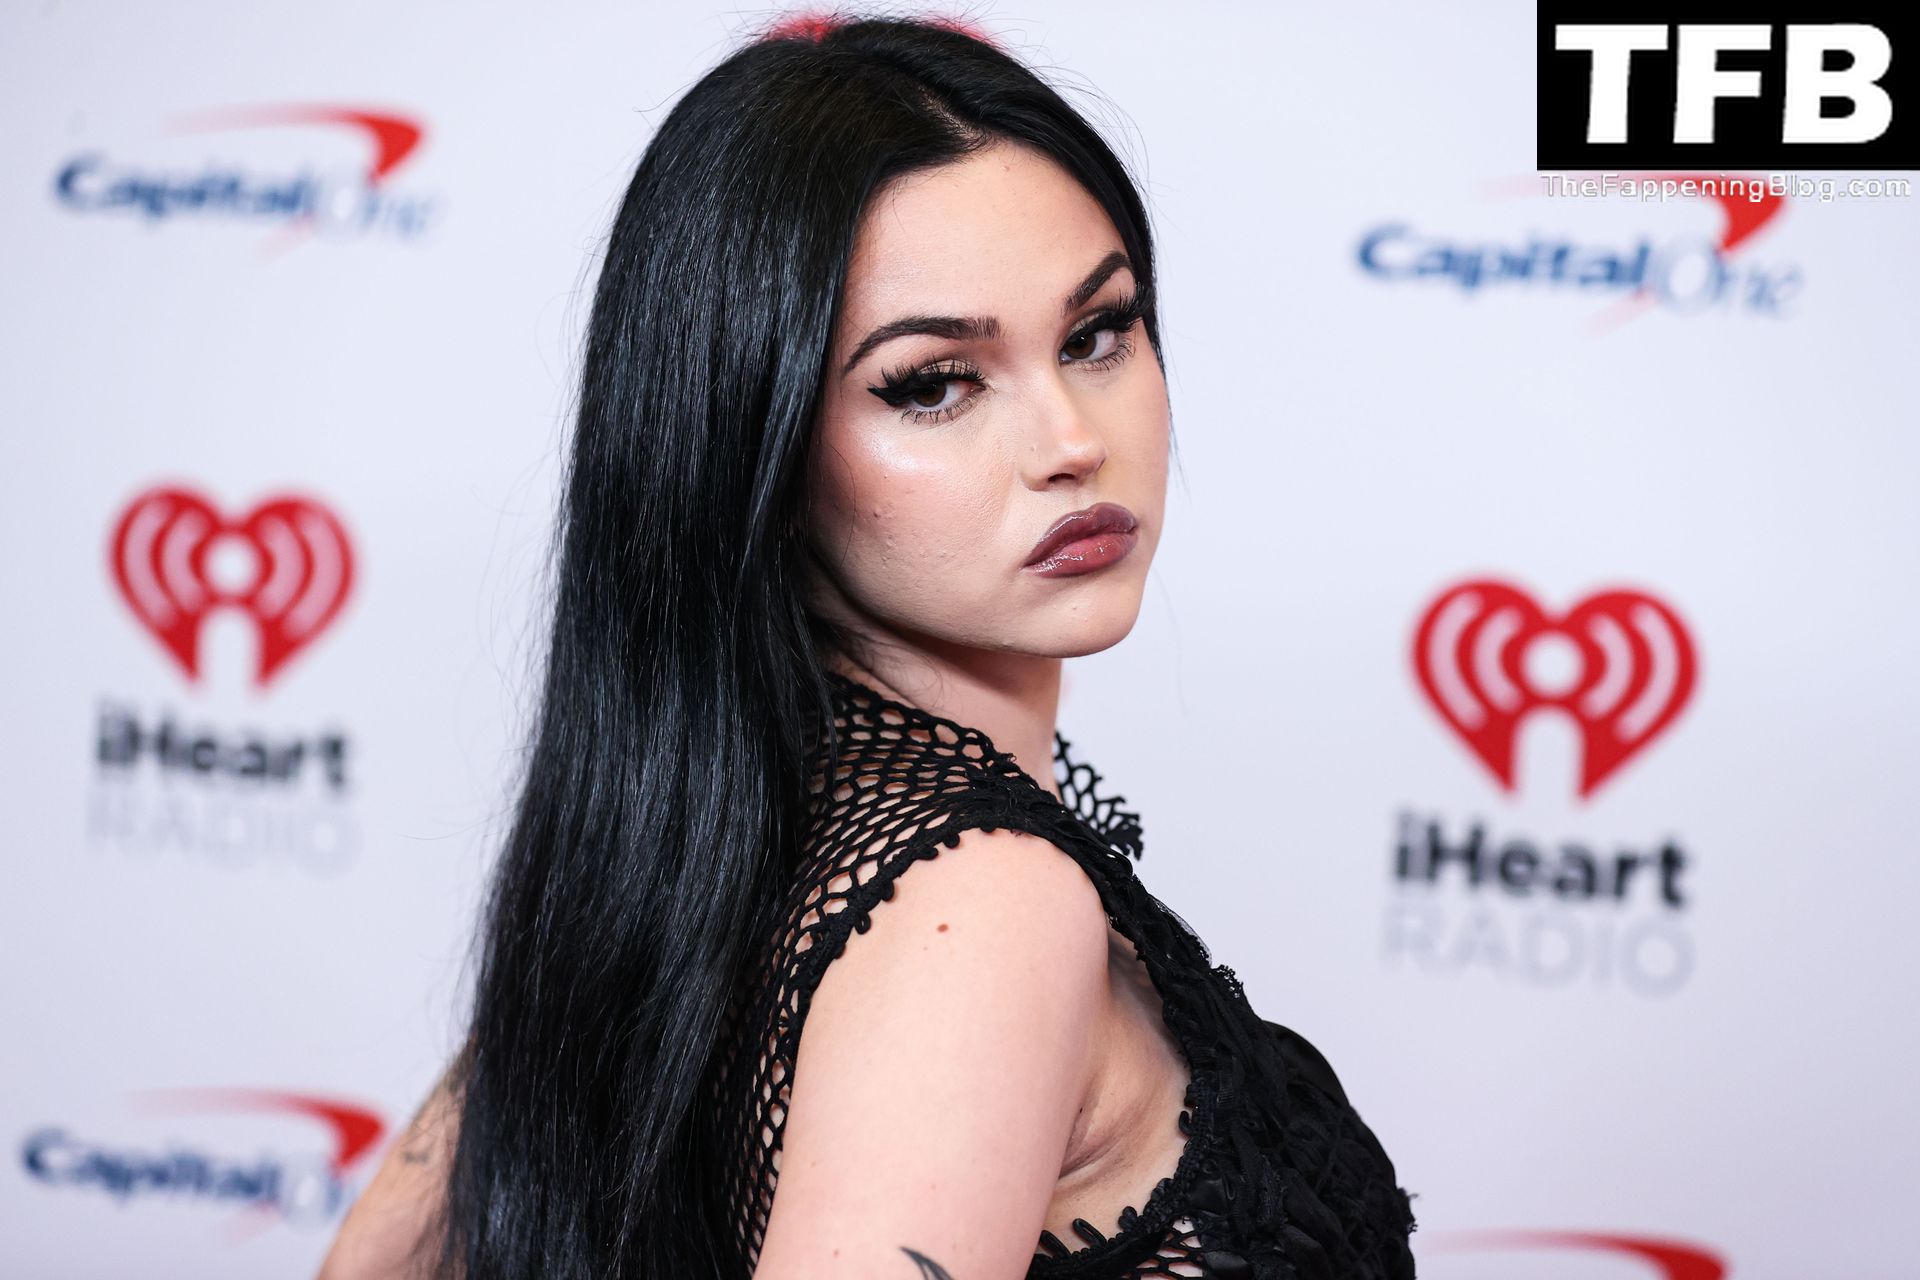 Maggie Lindemann Sexy The Fappening Blog 23 - Maggie Lindemann Flaunts Her Sexy Legs & Tits at the iHeartRadio Music Festival (23 Photos)